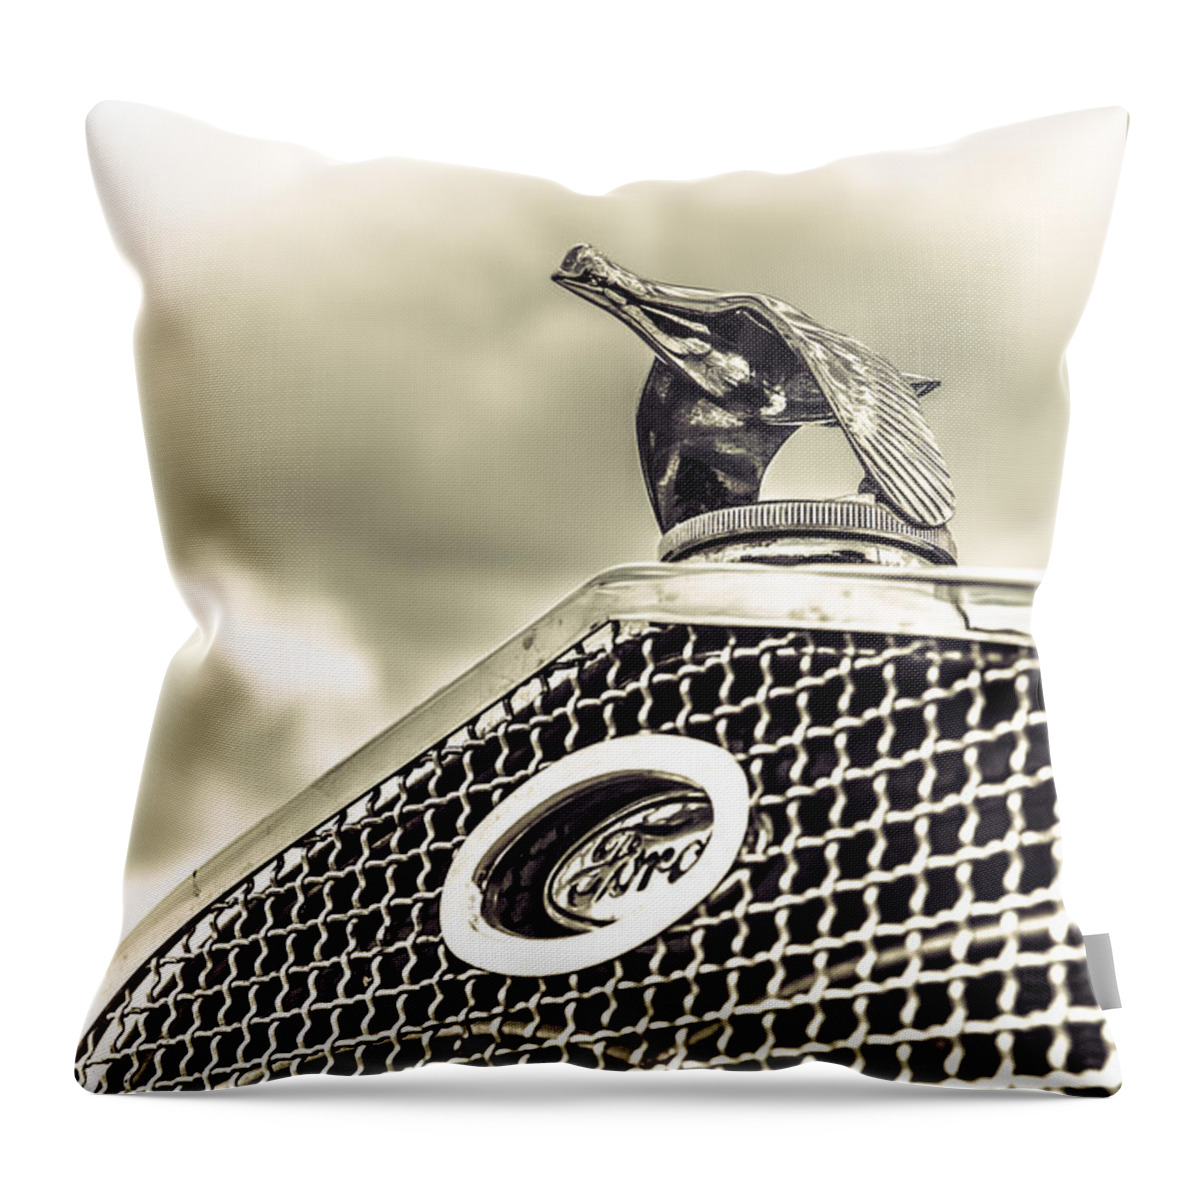 Ford Throw Pillow featuring the photograph Frozen In Flight by Caitlyn Grasso